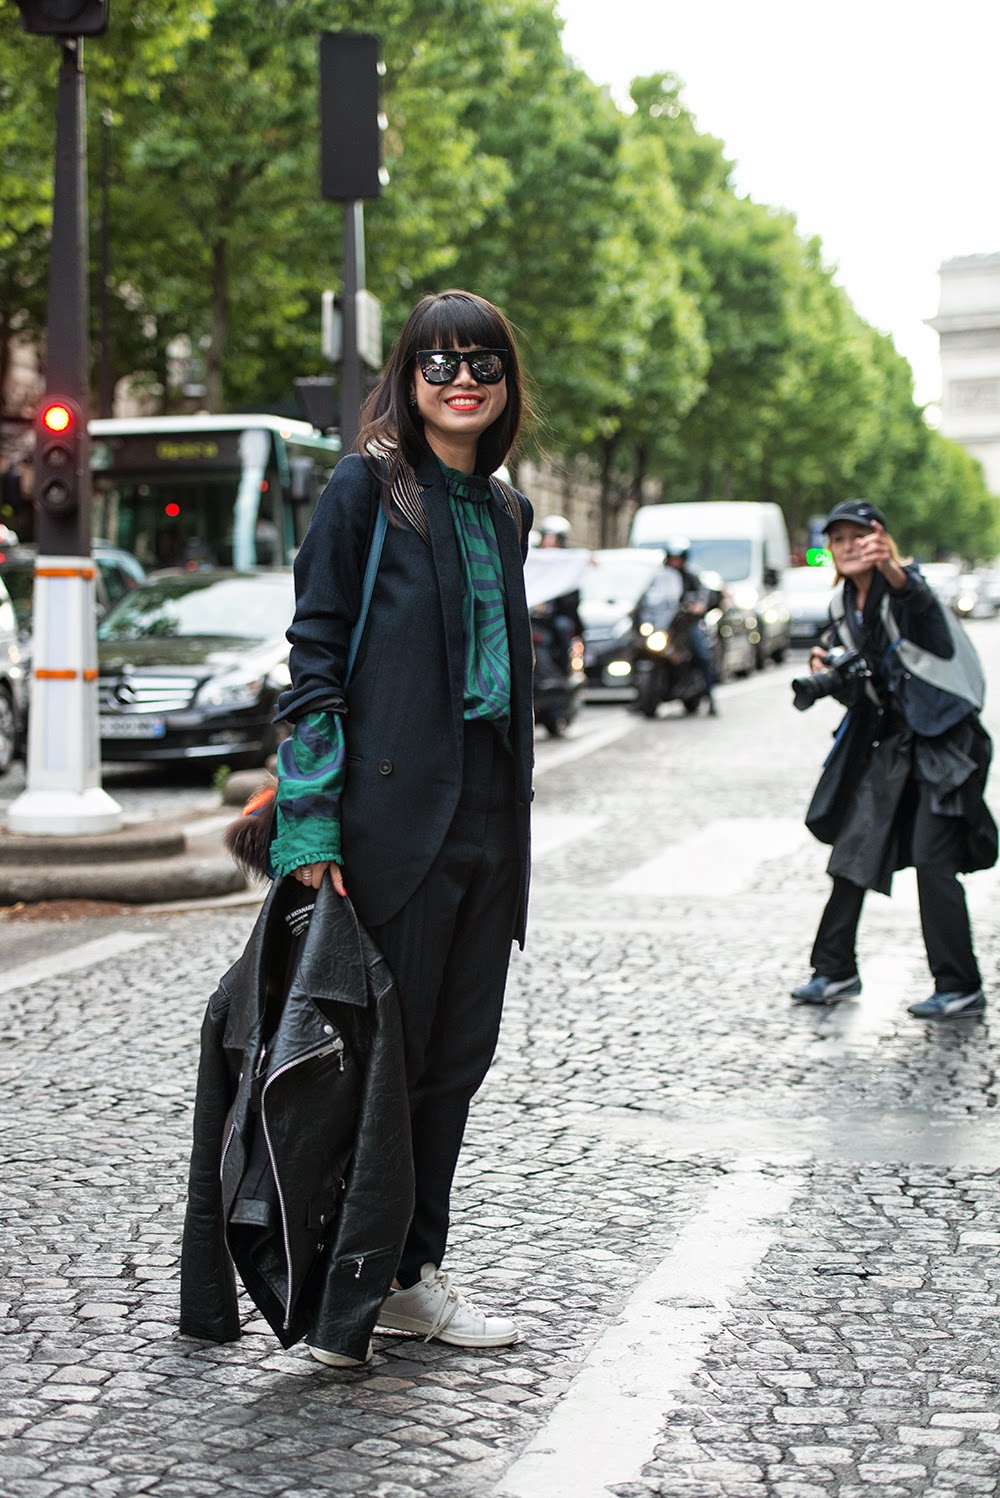 WIMIRY: Style in Paris.